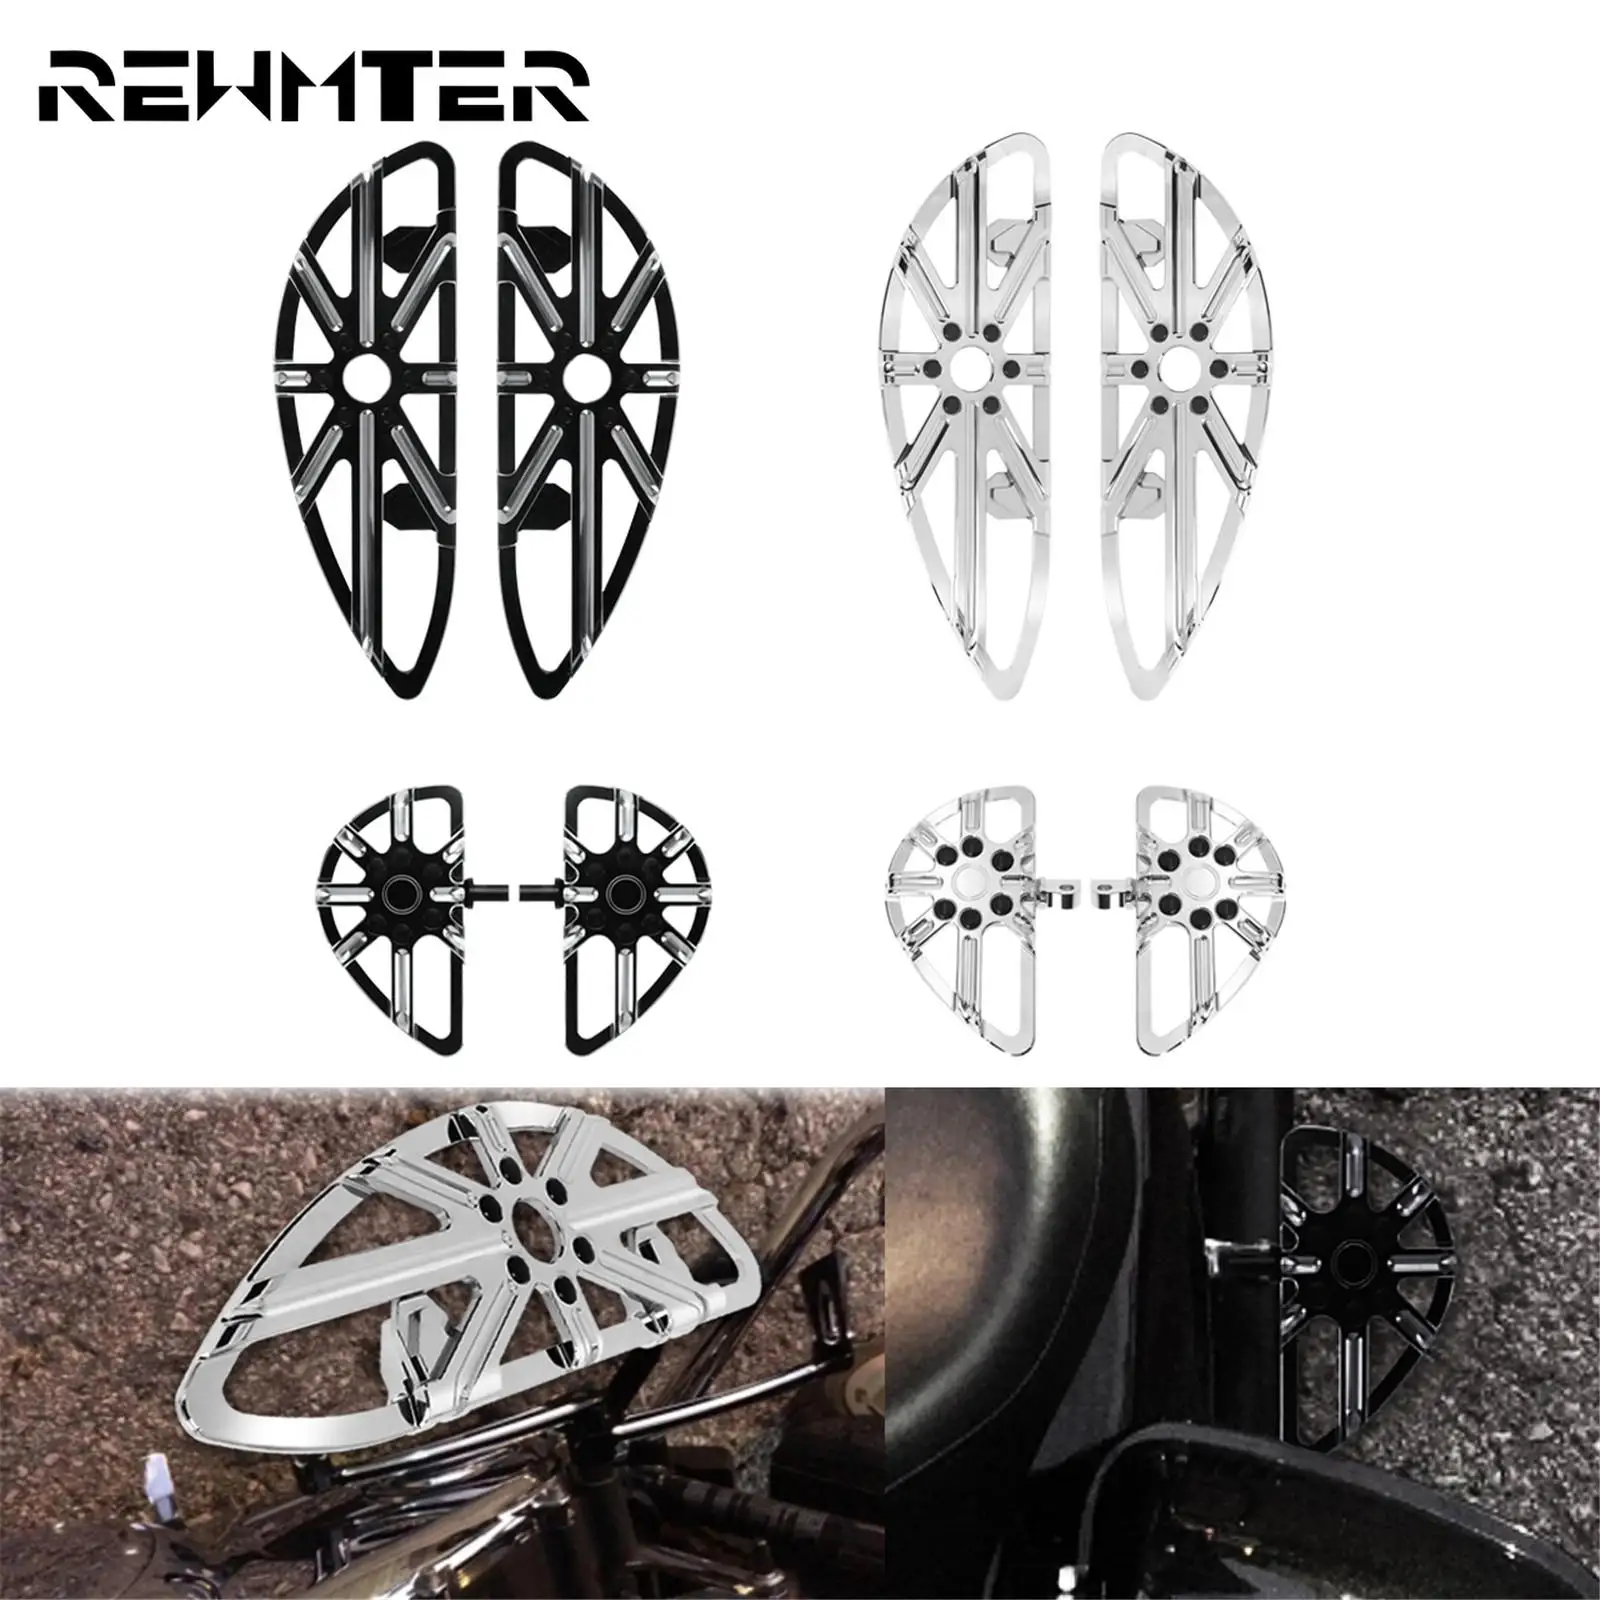 

Motorcycle Driver Floorboard Male Mount Foot Rest Pegs Pedal Black/Chrome For Harley Softail Touring Dyna Road Glide FLH Fat Boy